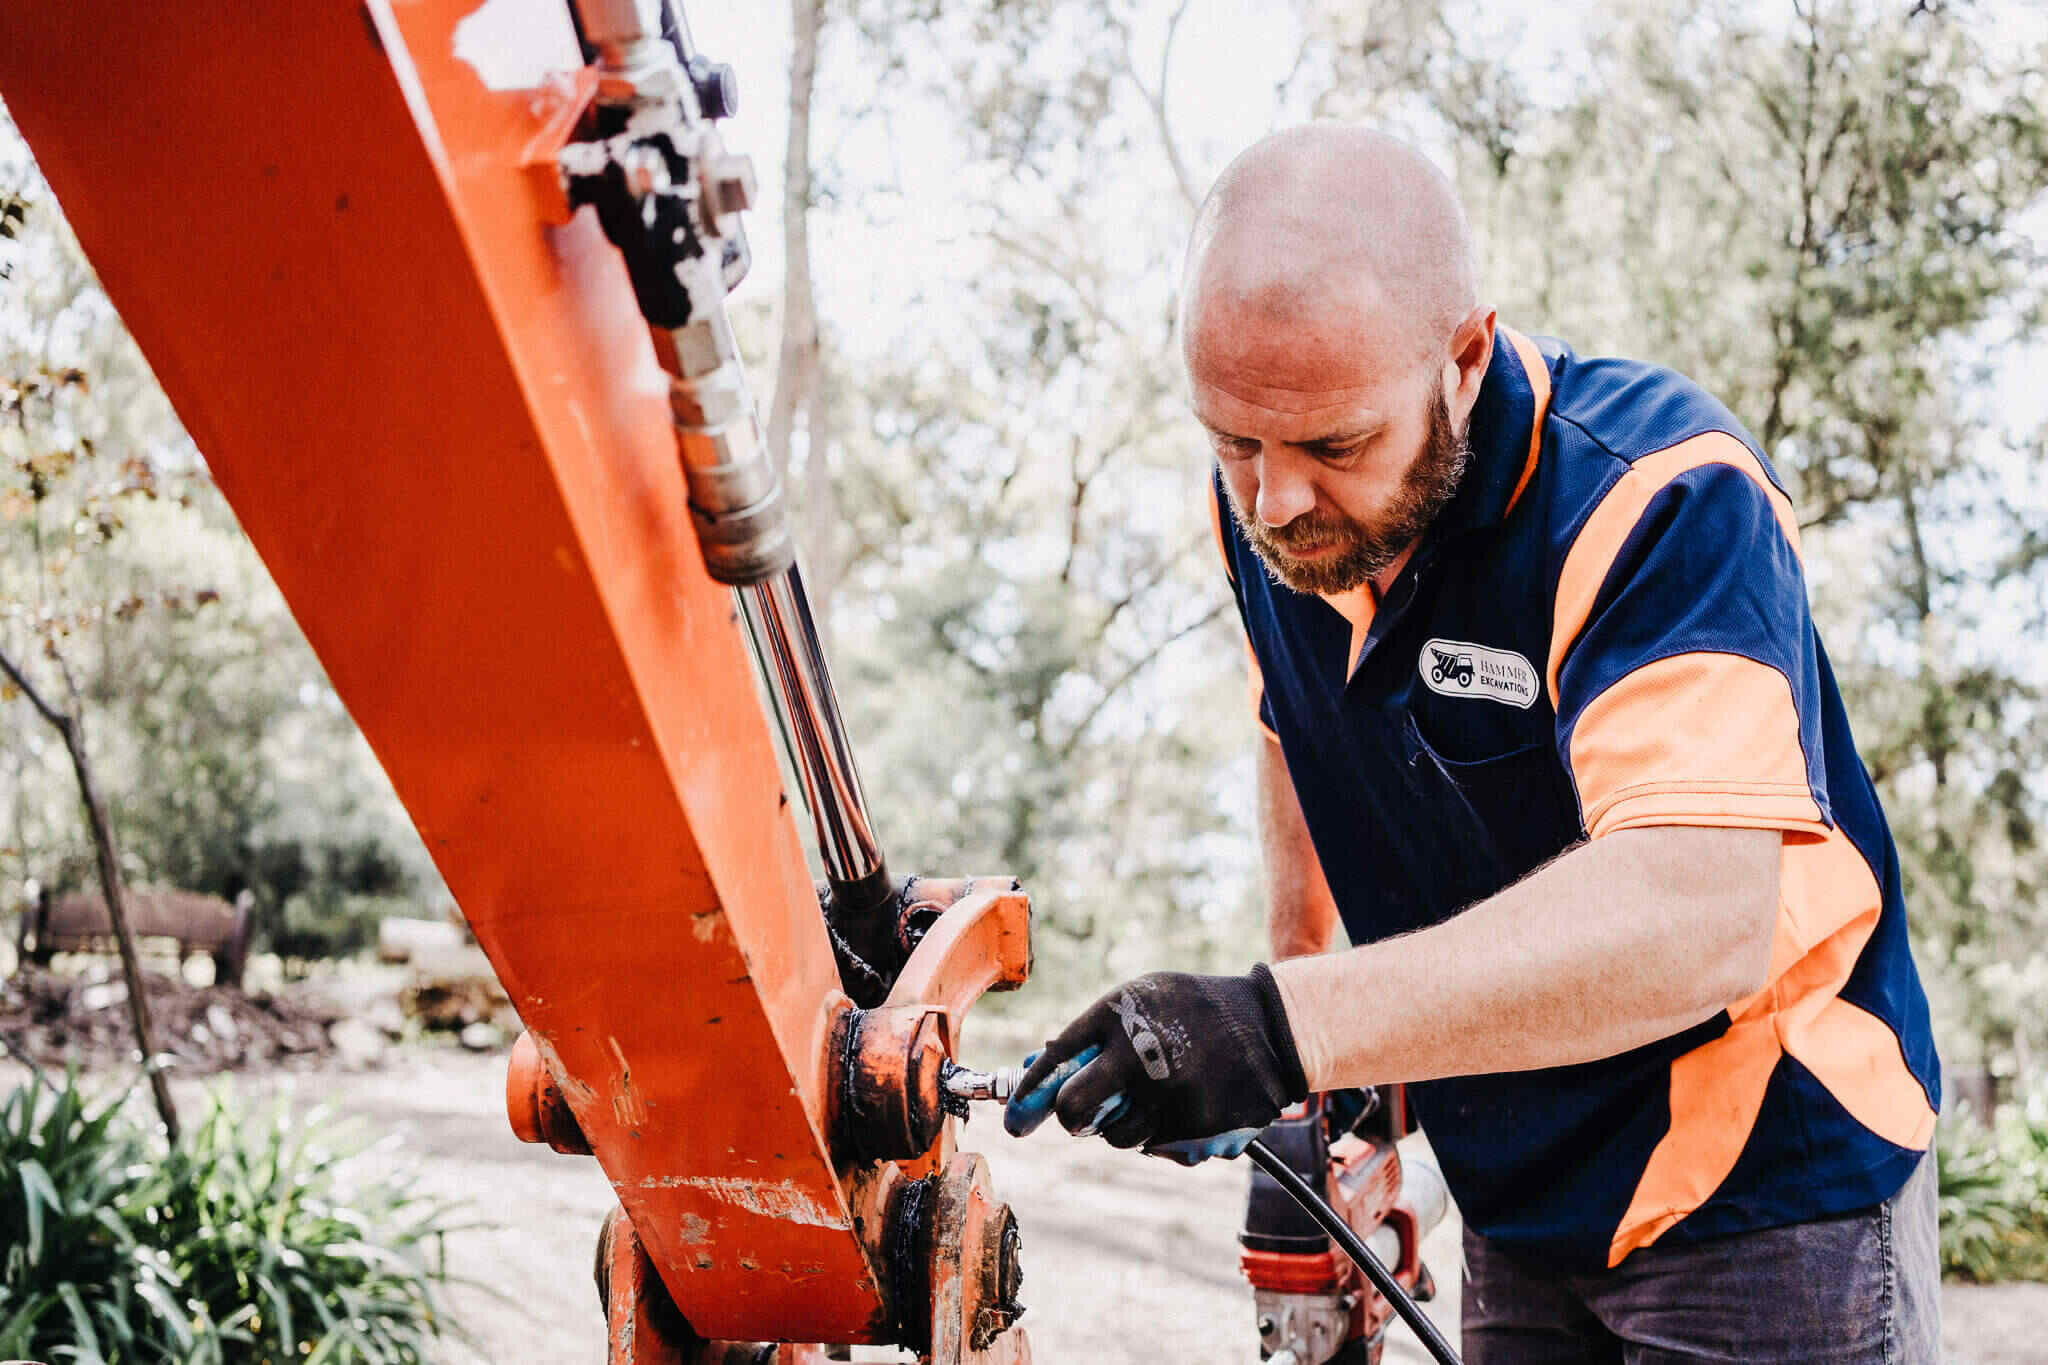 excavation melbourne, melbourne earthmoving contractors, eartworks contractors, excavation melbourne northern suburbs